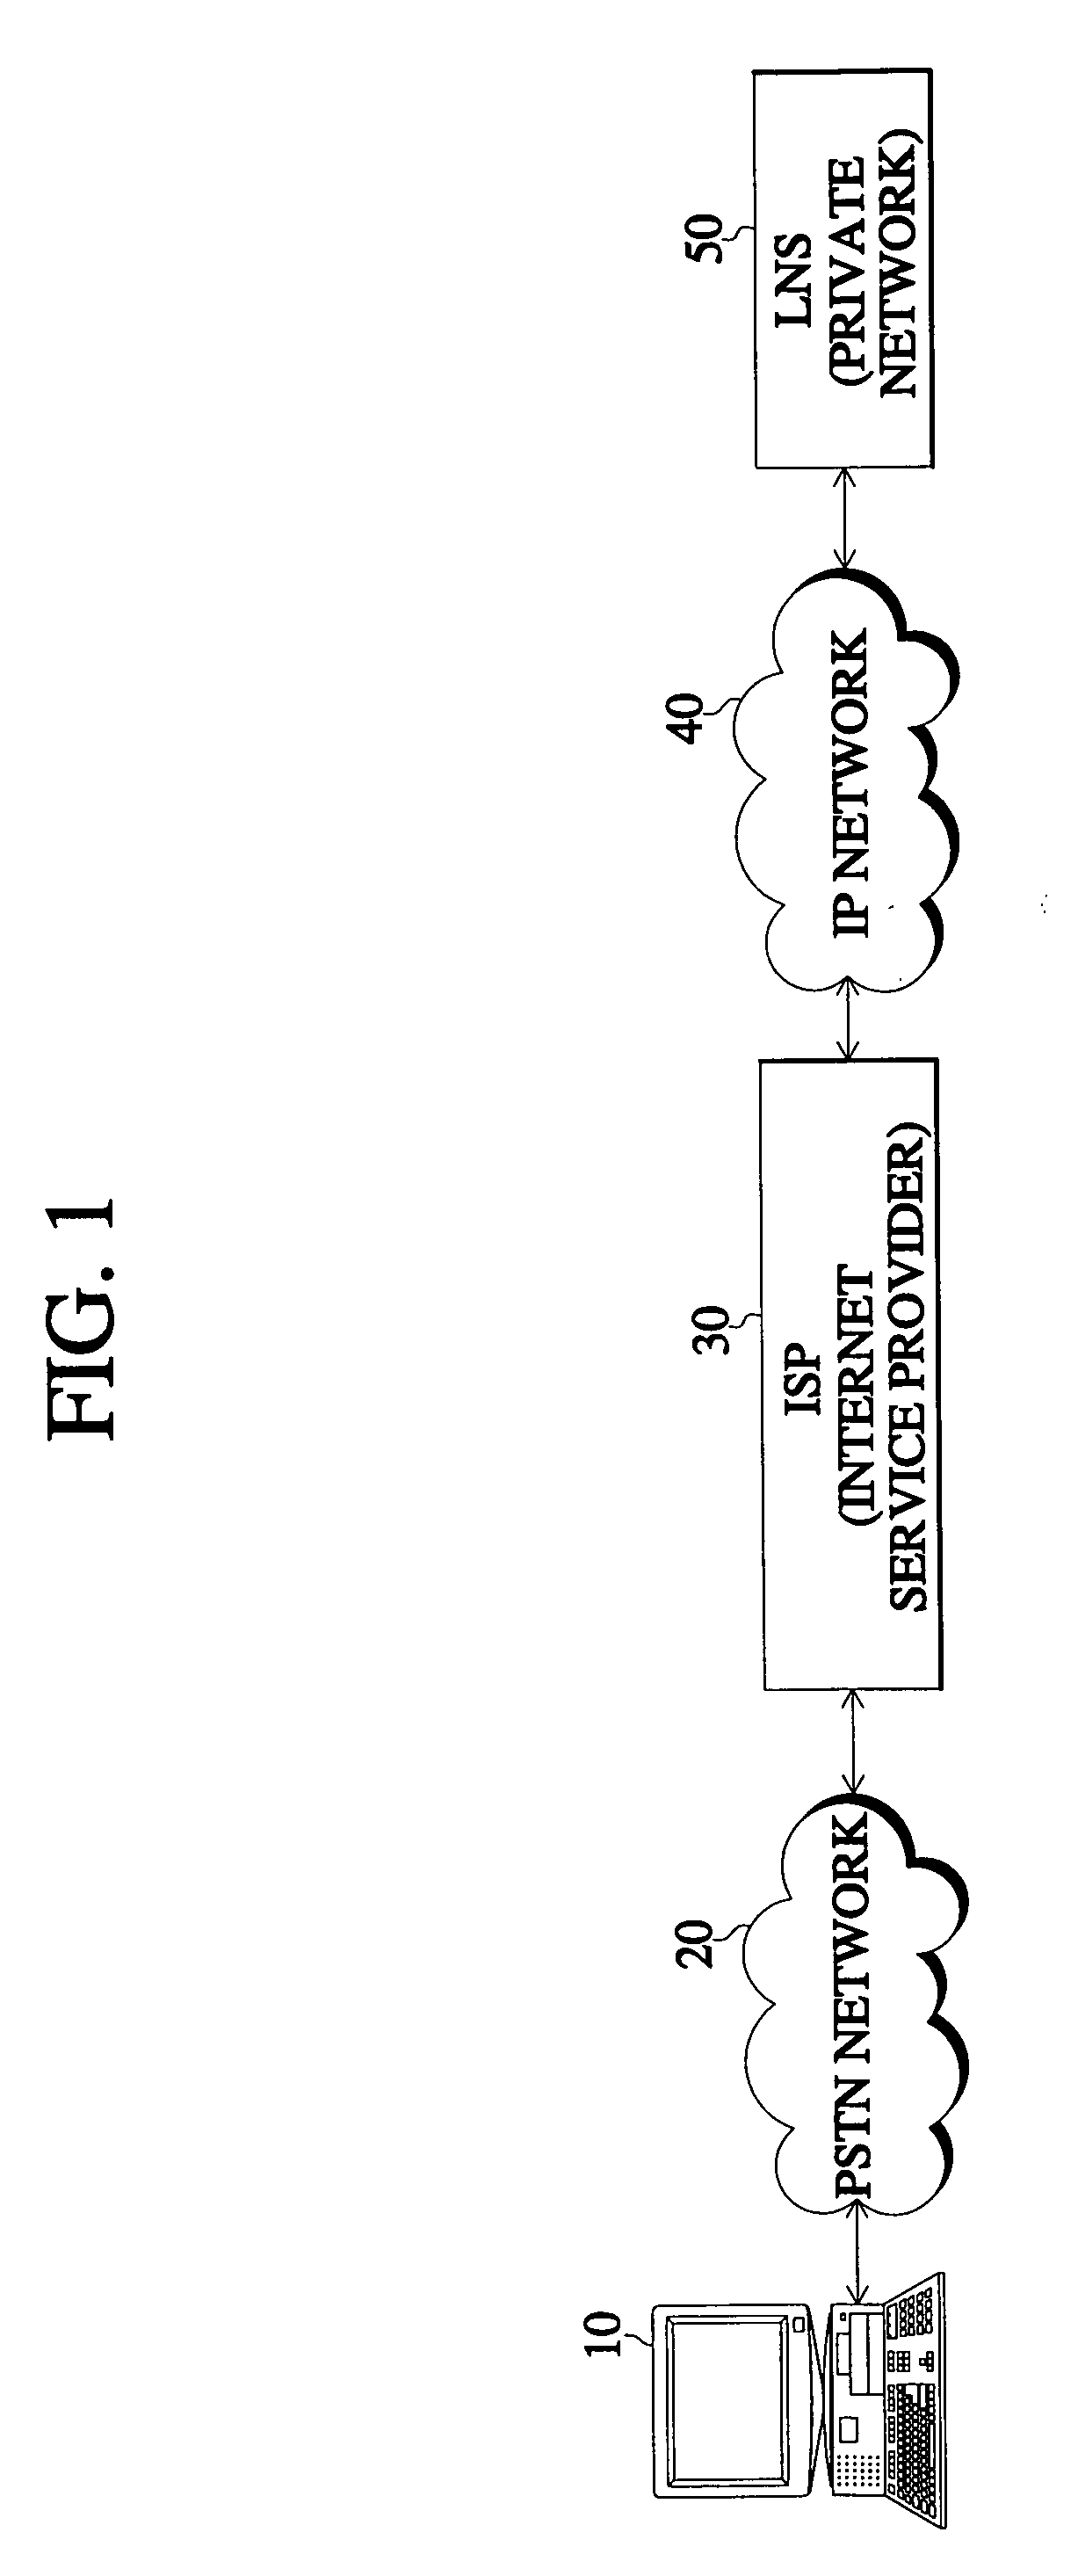 Method for encrypting data of an access virtual private network (VPN)